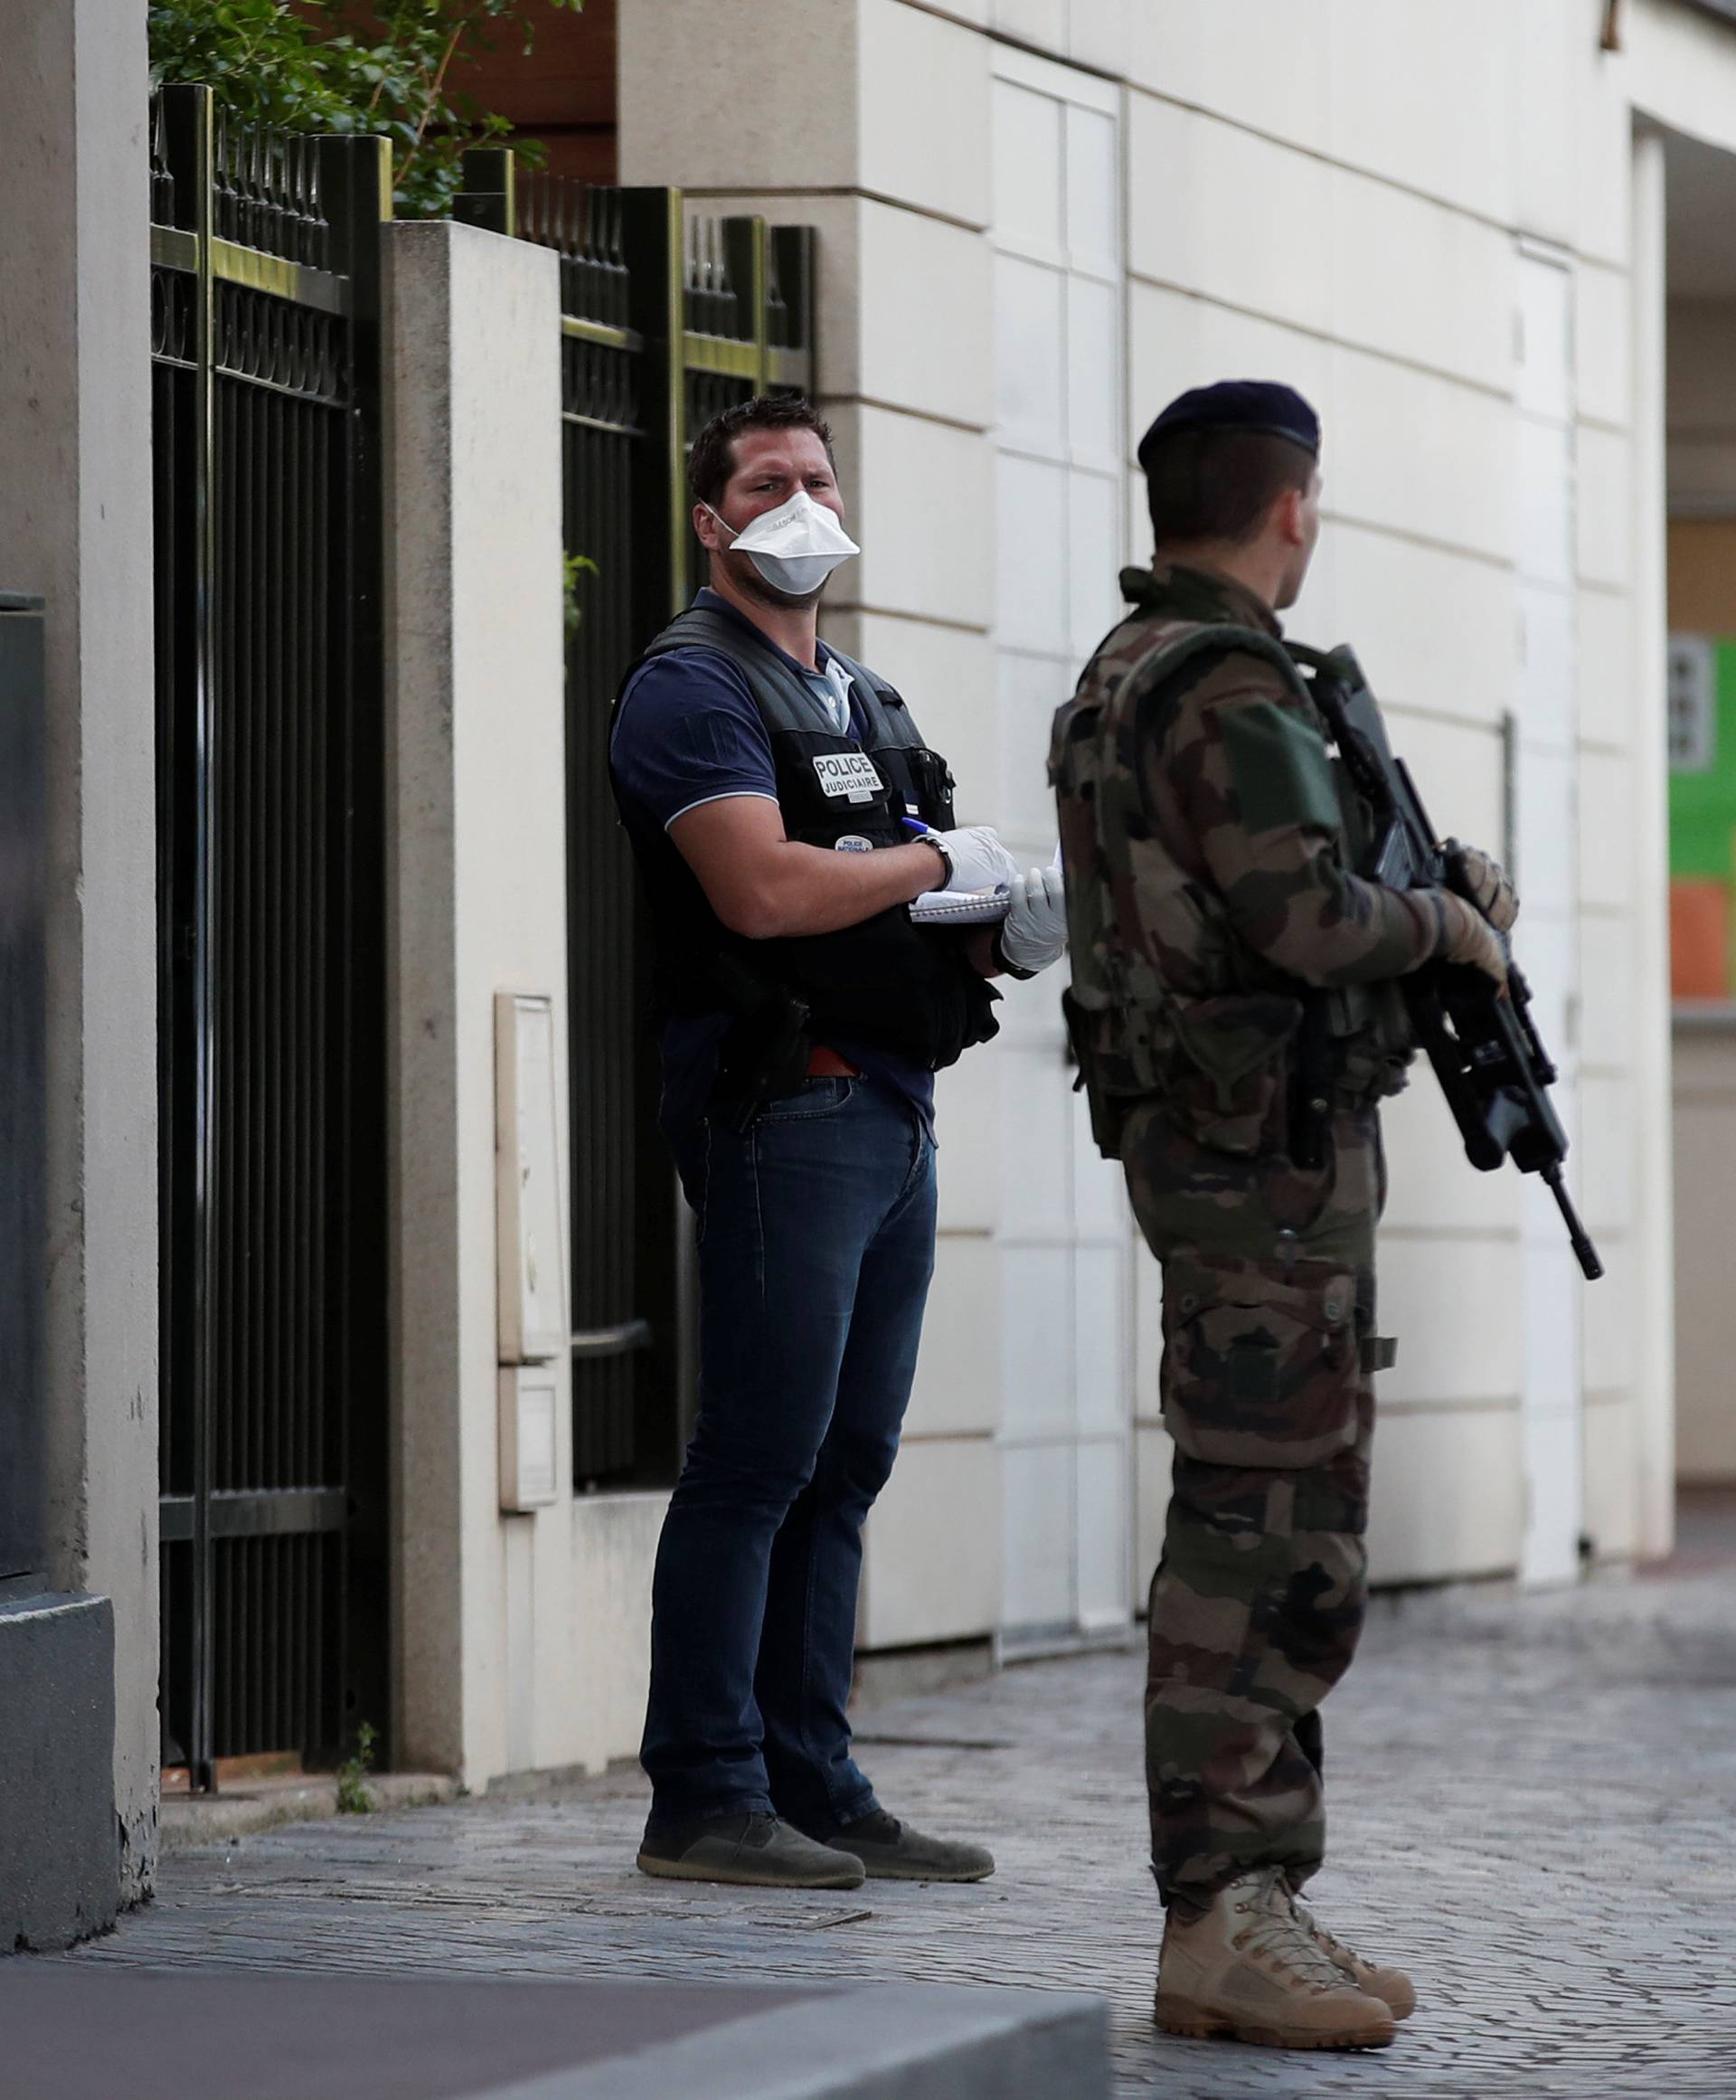 A police investigator and an armed soldier work near the scene where French soliders were hit and injured by a vehicle in the western Paris suburb of Levallois-Perret